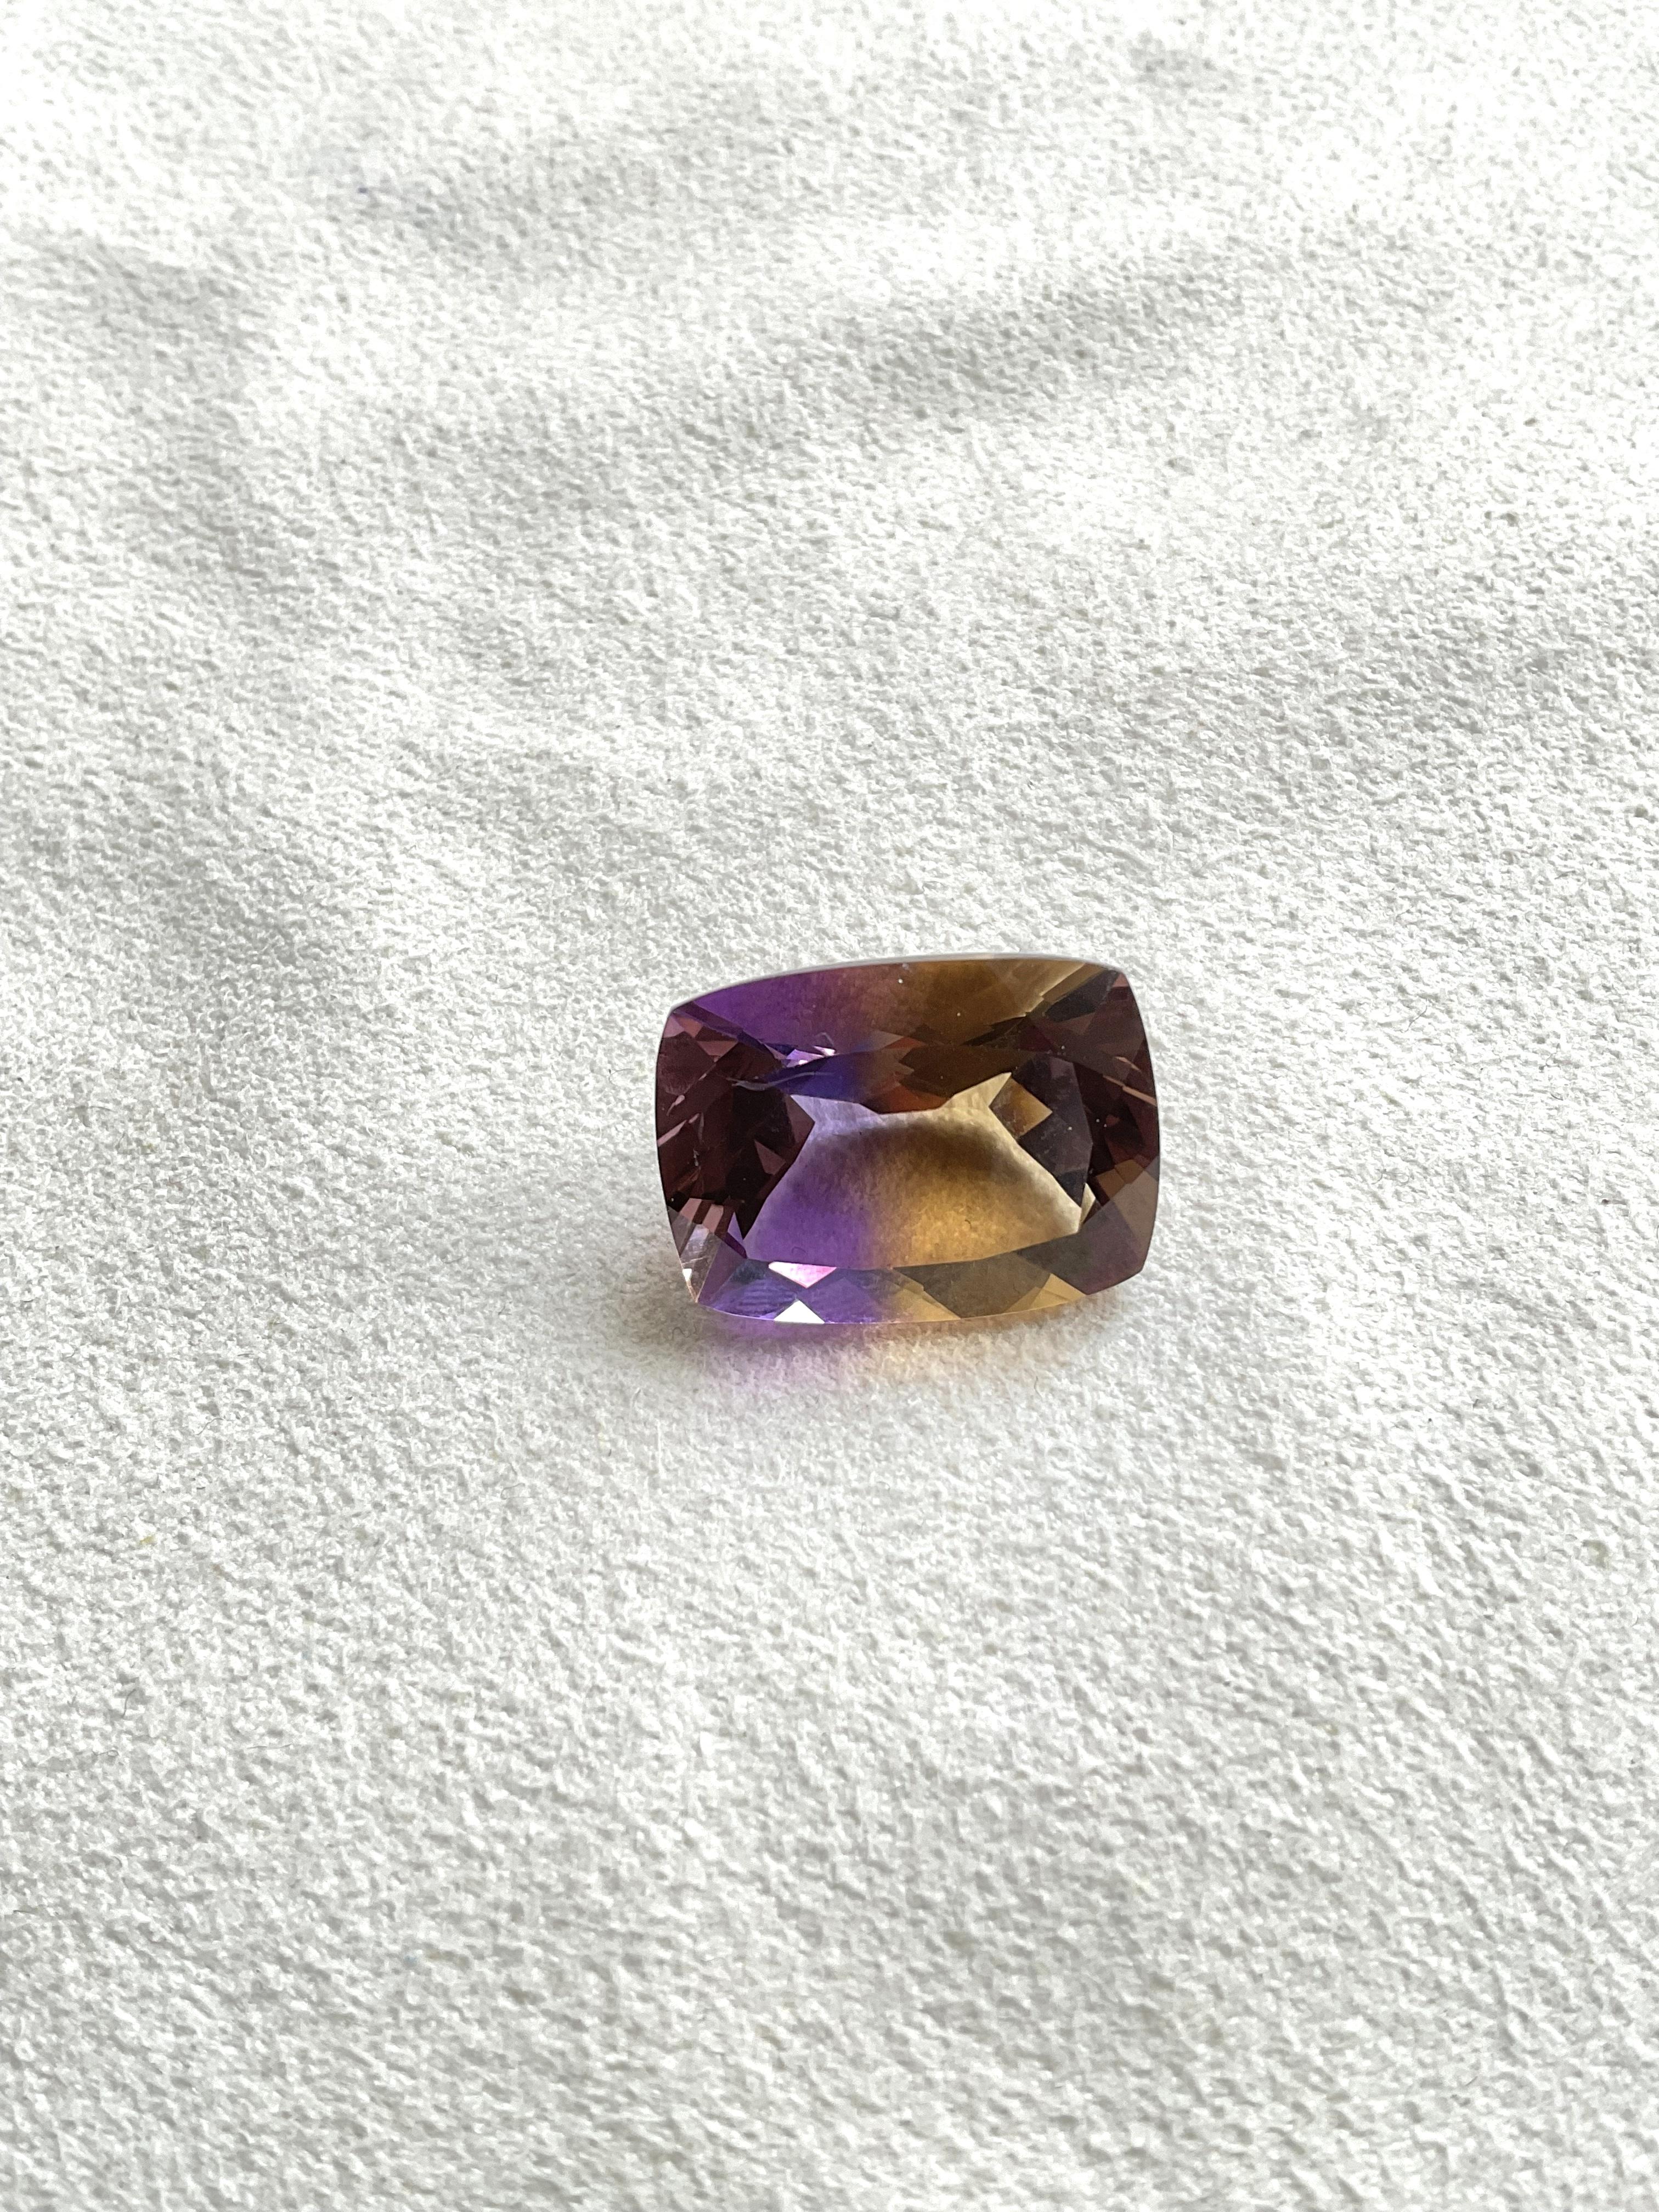 Loupe clean 19.13 cts Ametrine Cushion Faceted Cut Stone For Jewelry Natural Gem In New Condition For Sale In Jaipur, RJ